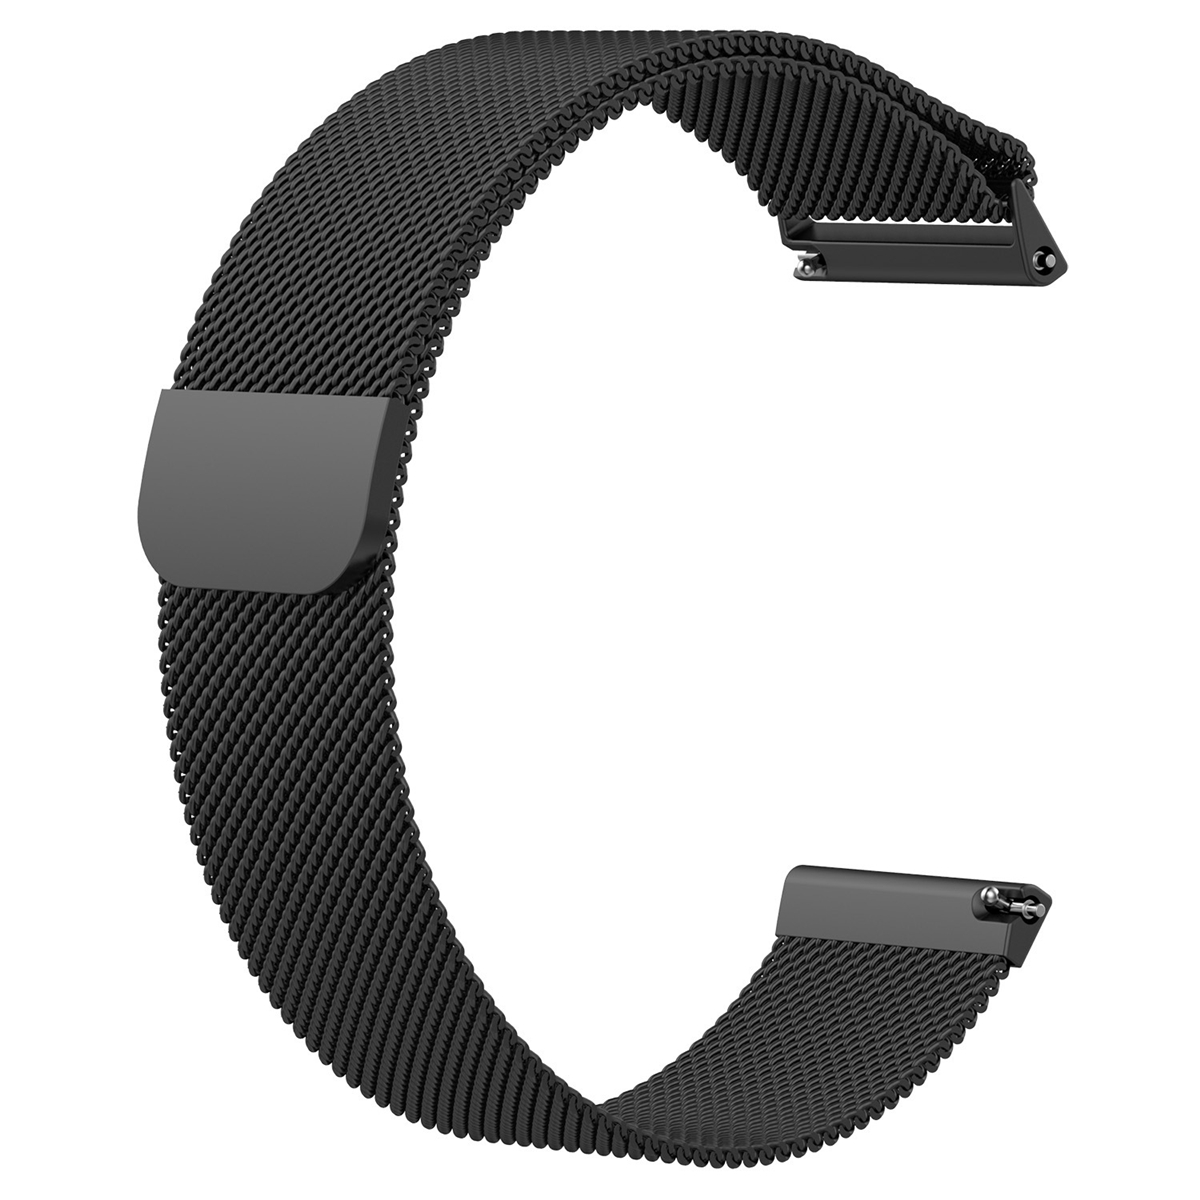 Bakeey-20mm-Replacement-Stainless-Steel-Wrist-Watch-Band-Strap-for-Fitbit-Versa-1331743-8